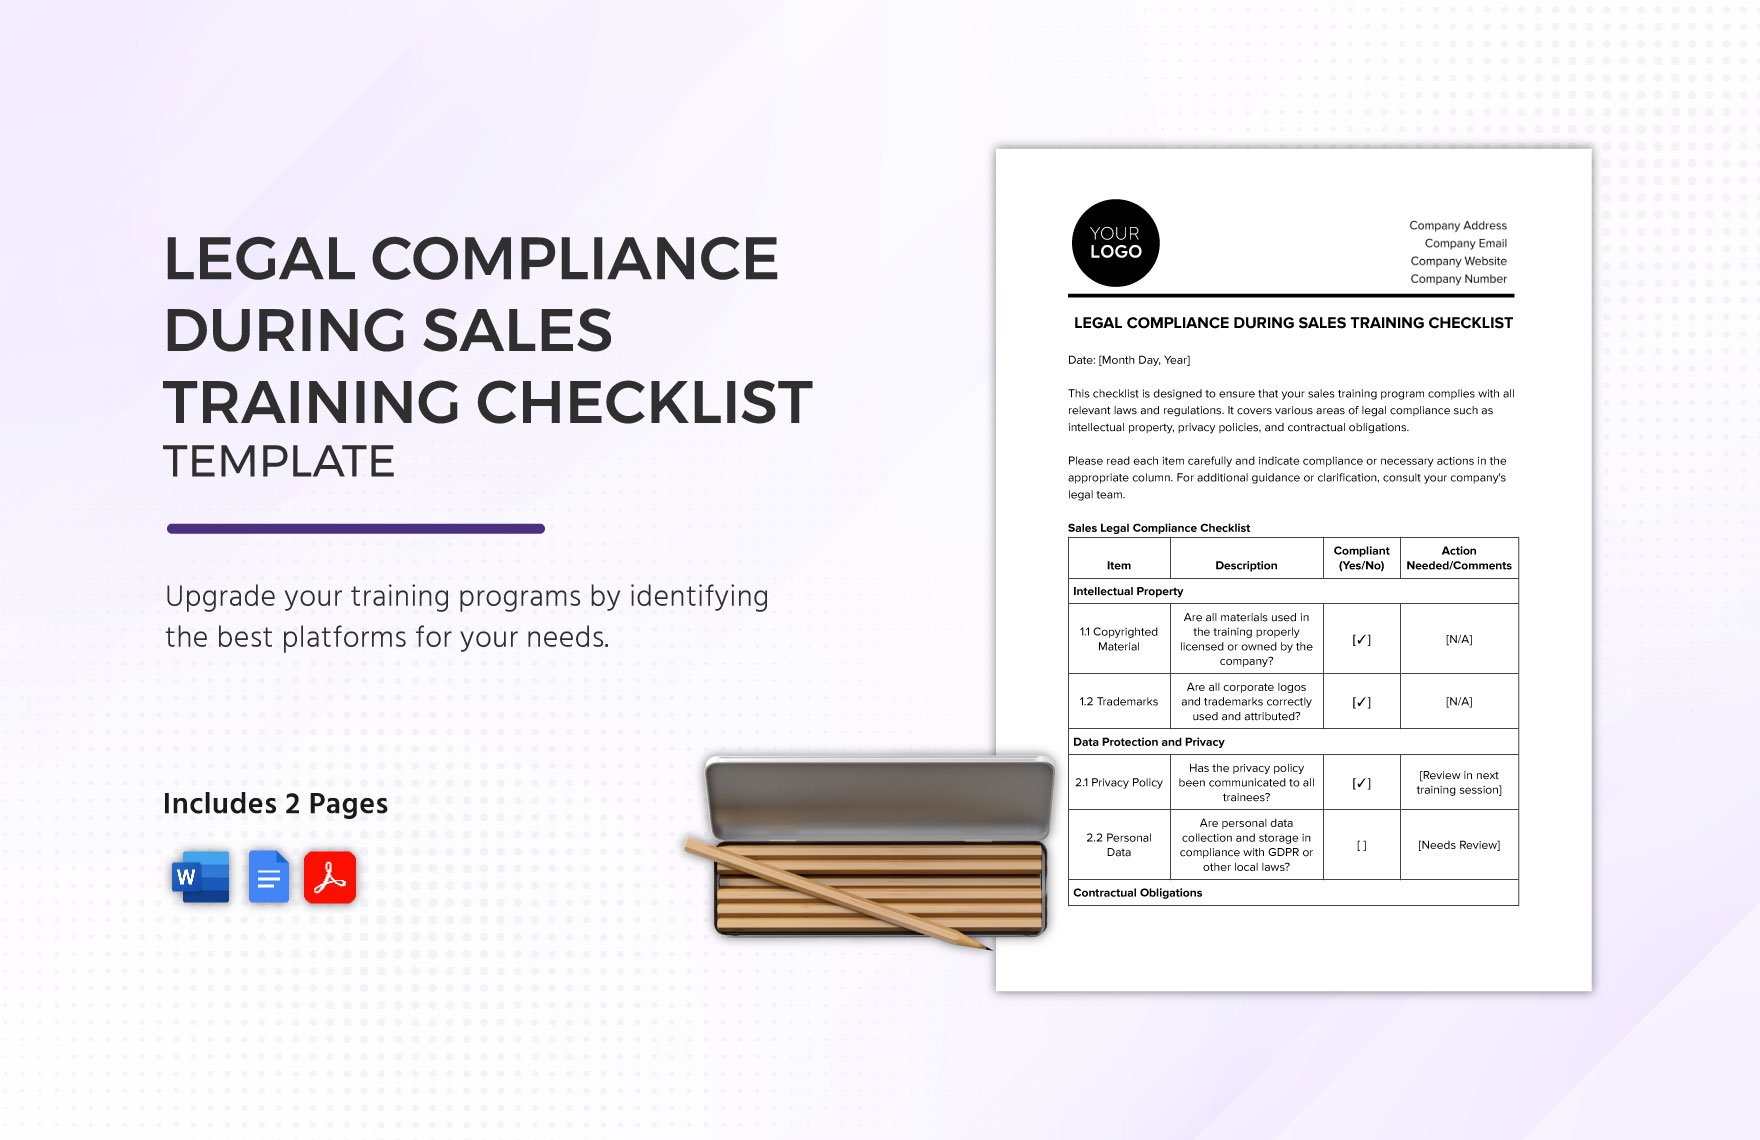 Legal Compliance During Sales Training Checklist Template in Word, Google Docs, PDF